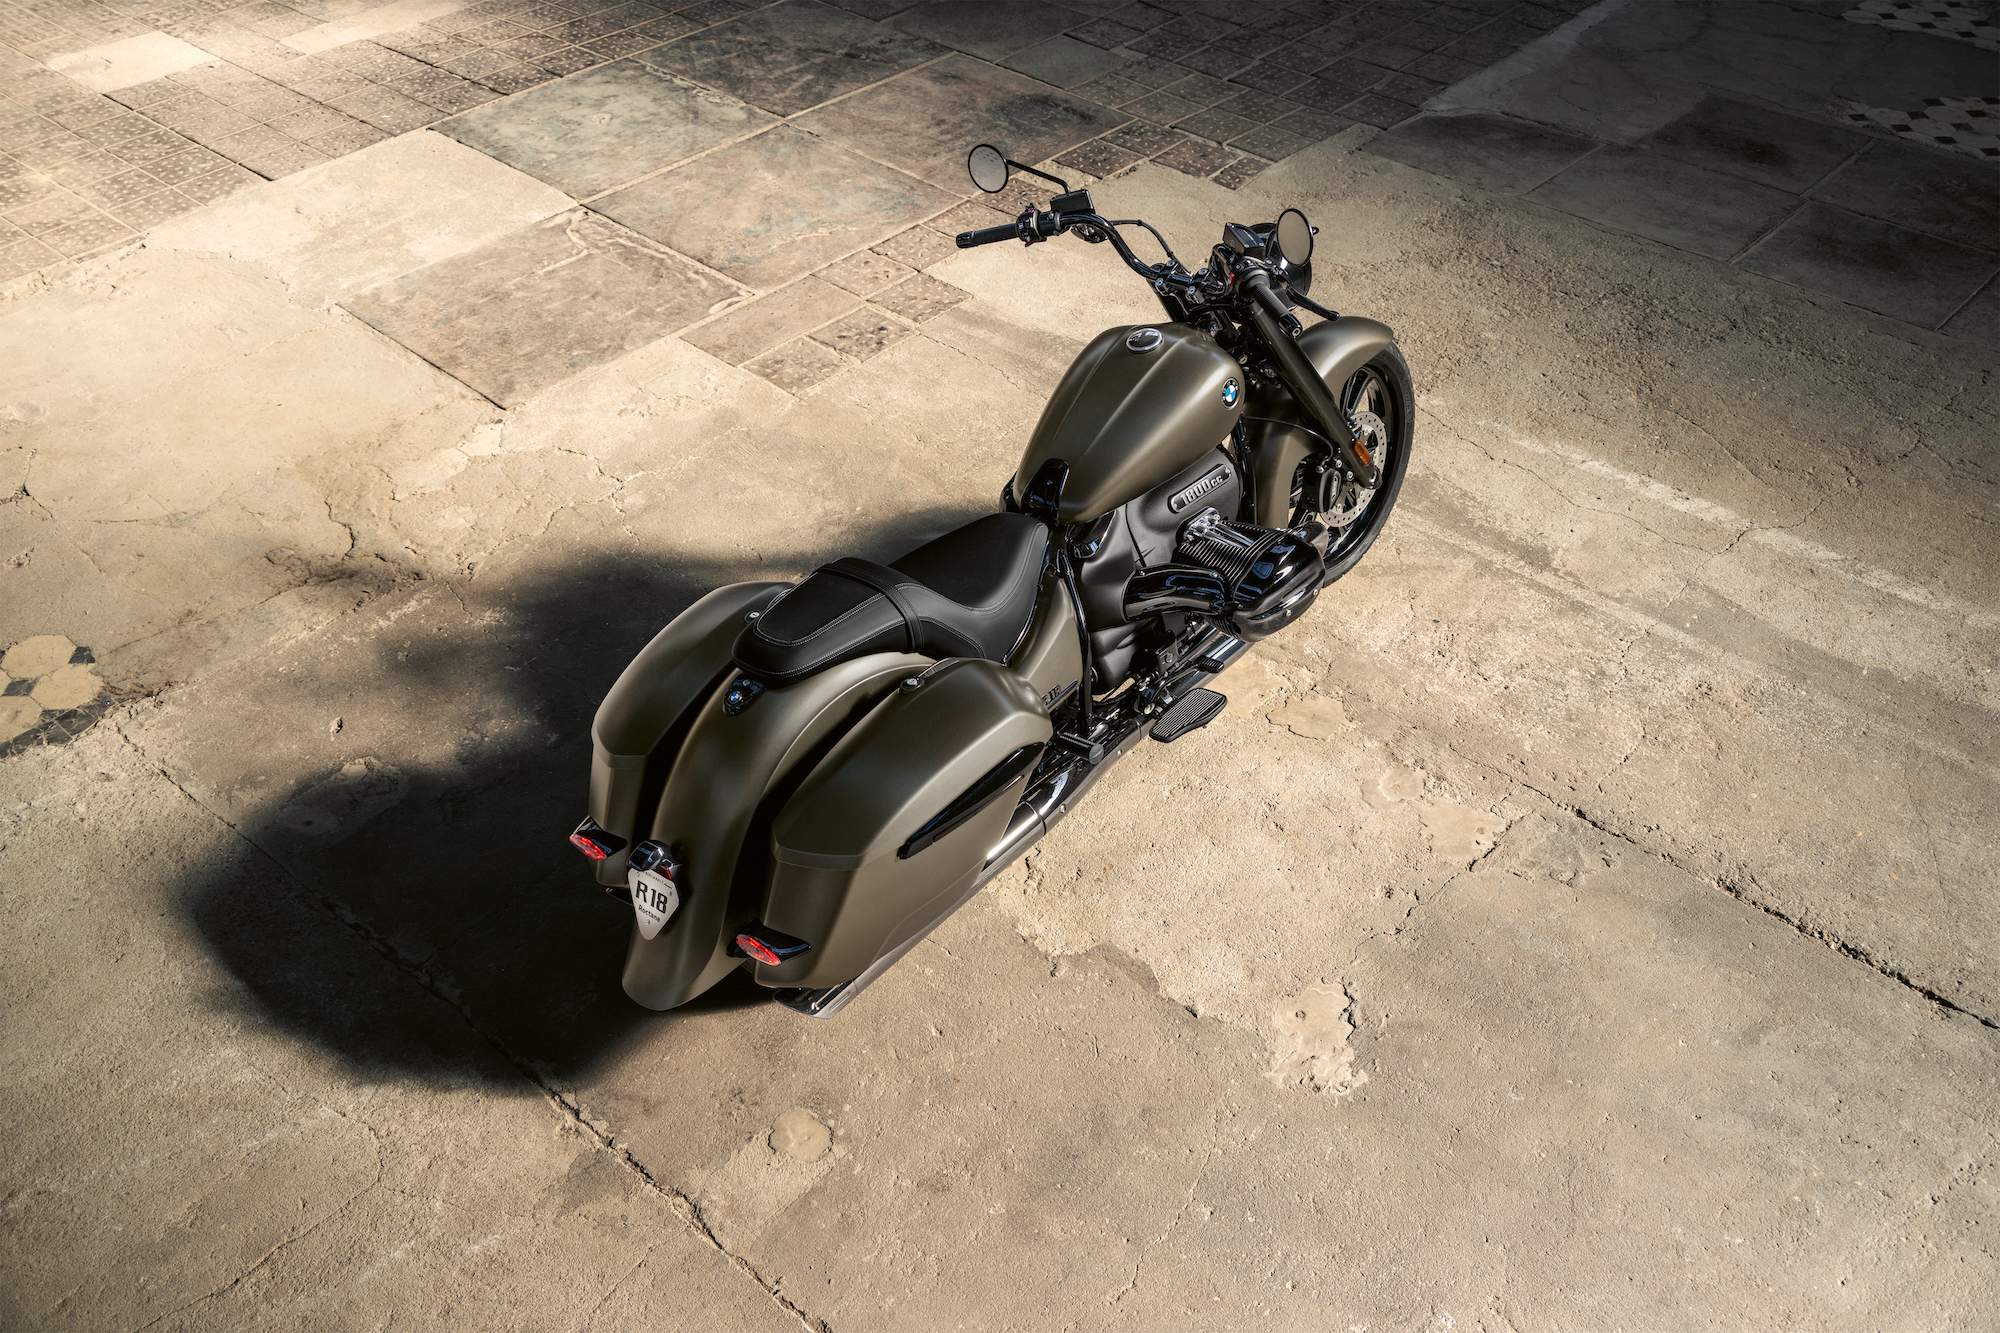 BMW's all-new R 18: The R 18 Roctane. Media sourced from BMW's recent press release.